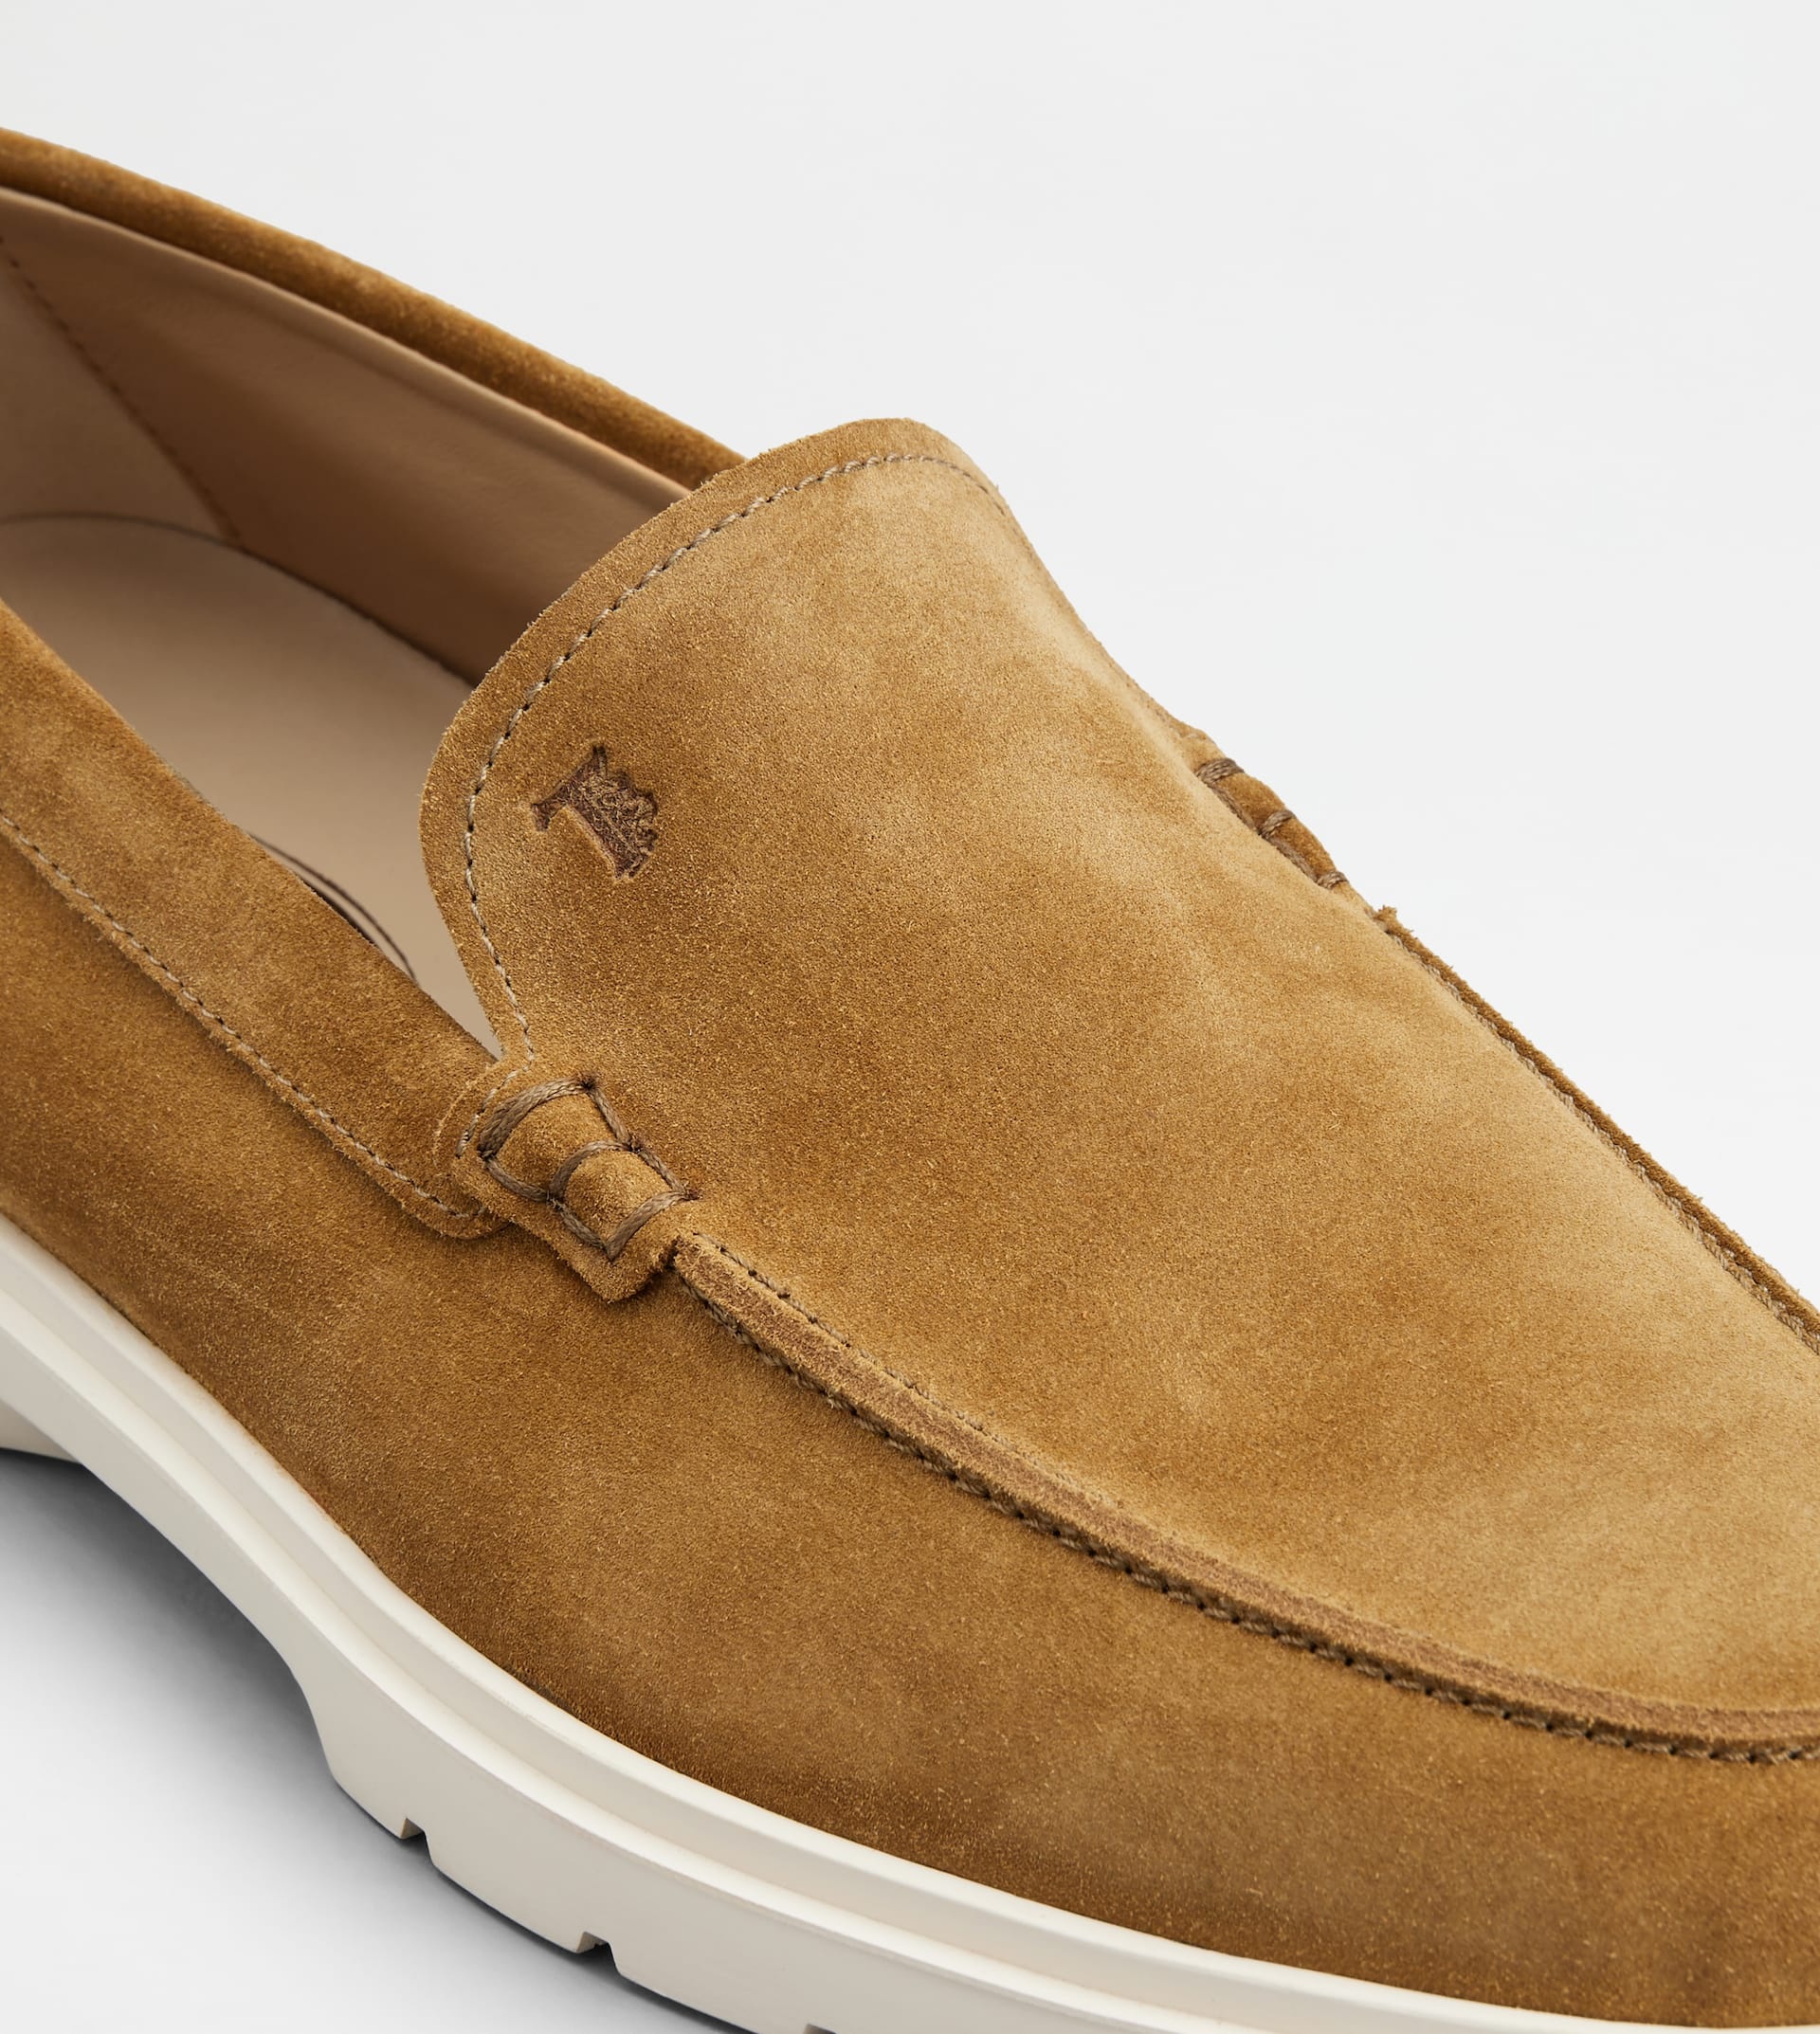 SLIPPER LOAFERS IN SUEDE - BROWN - 5